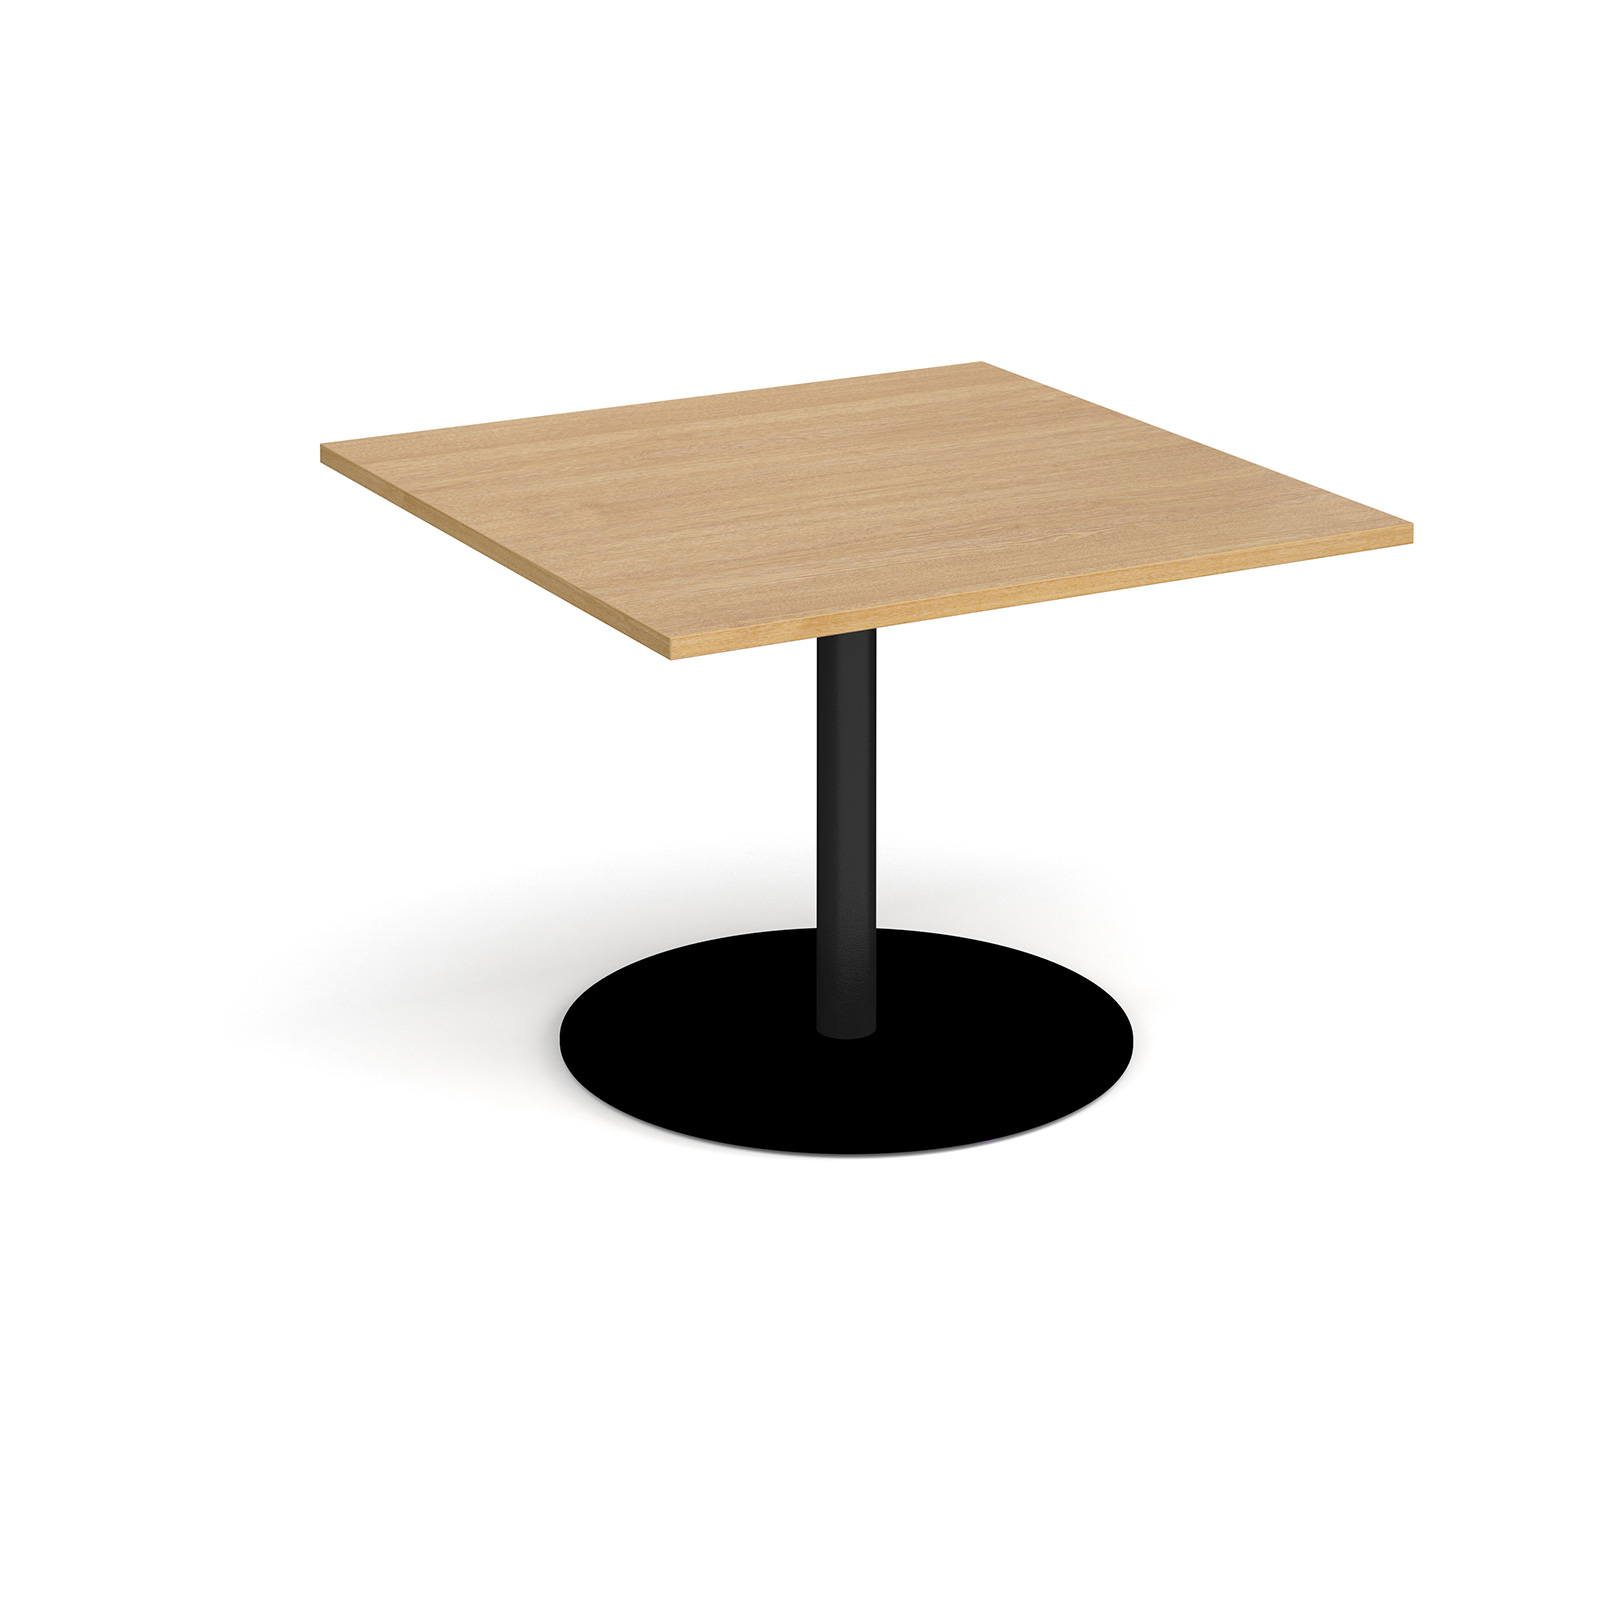 Eternal square extension table